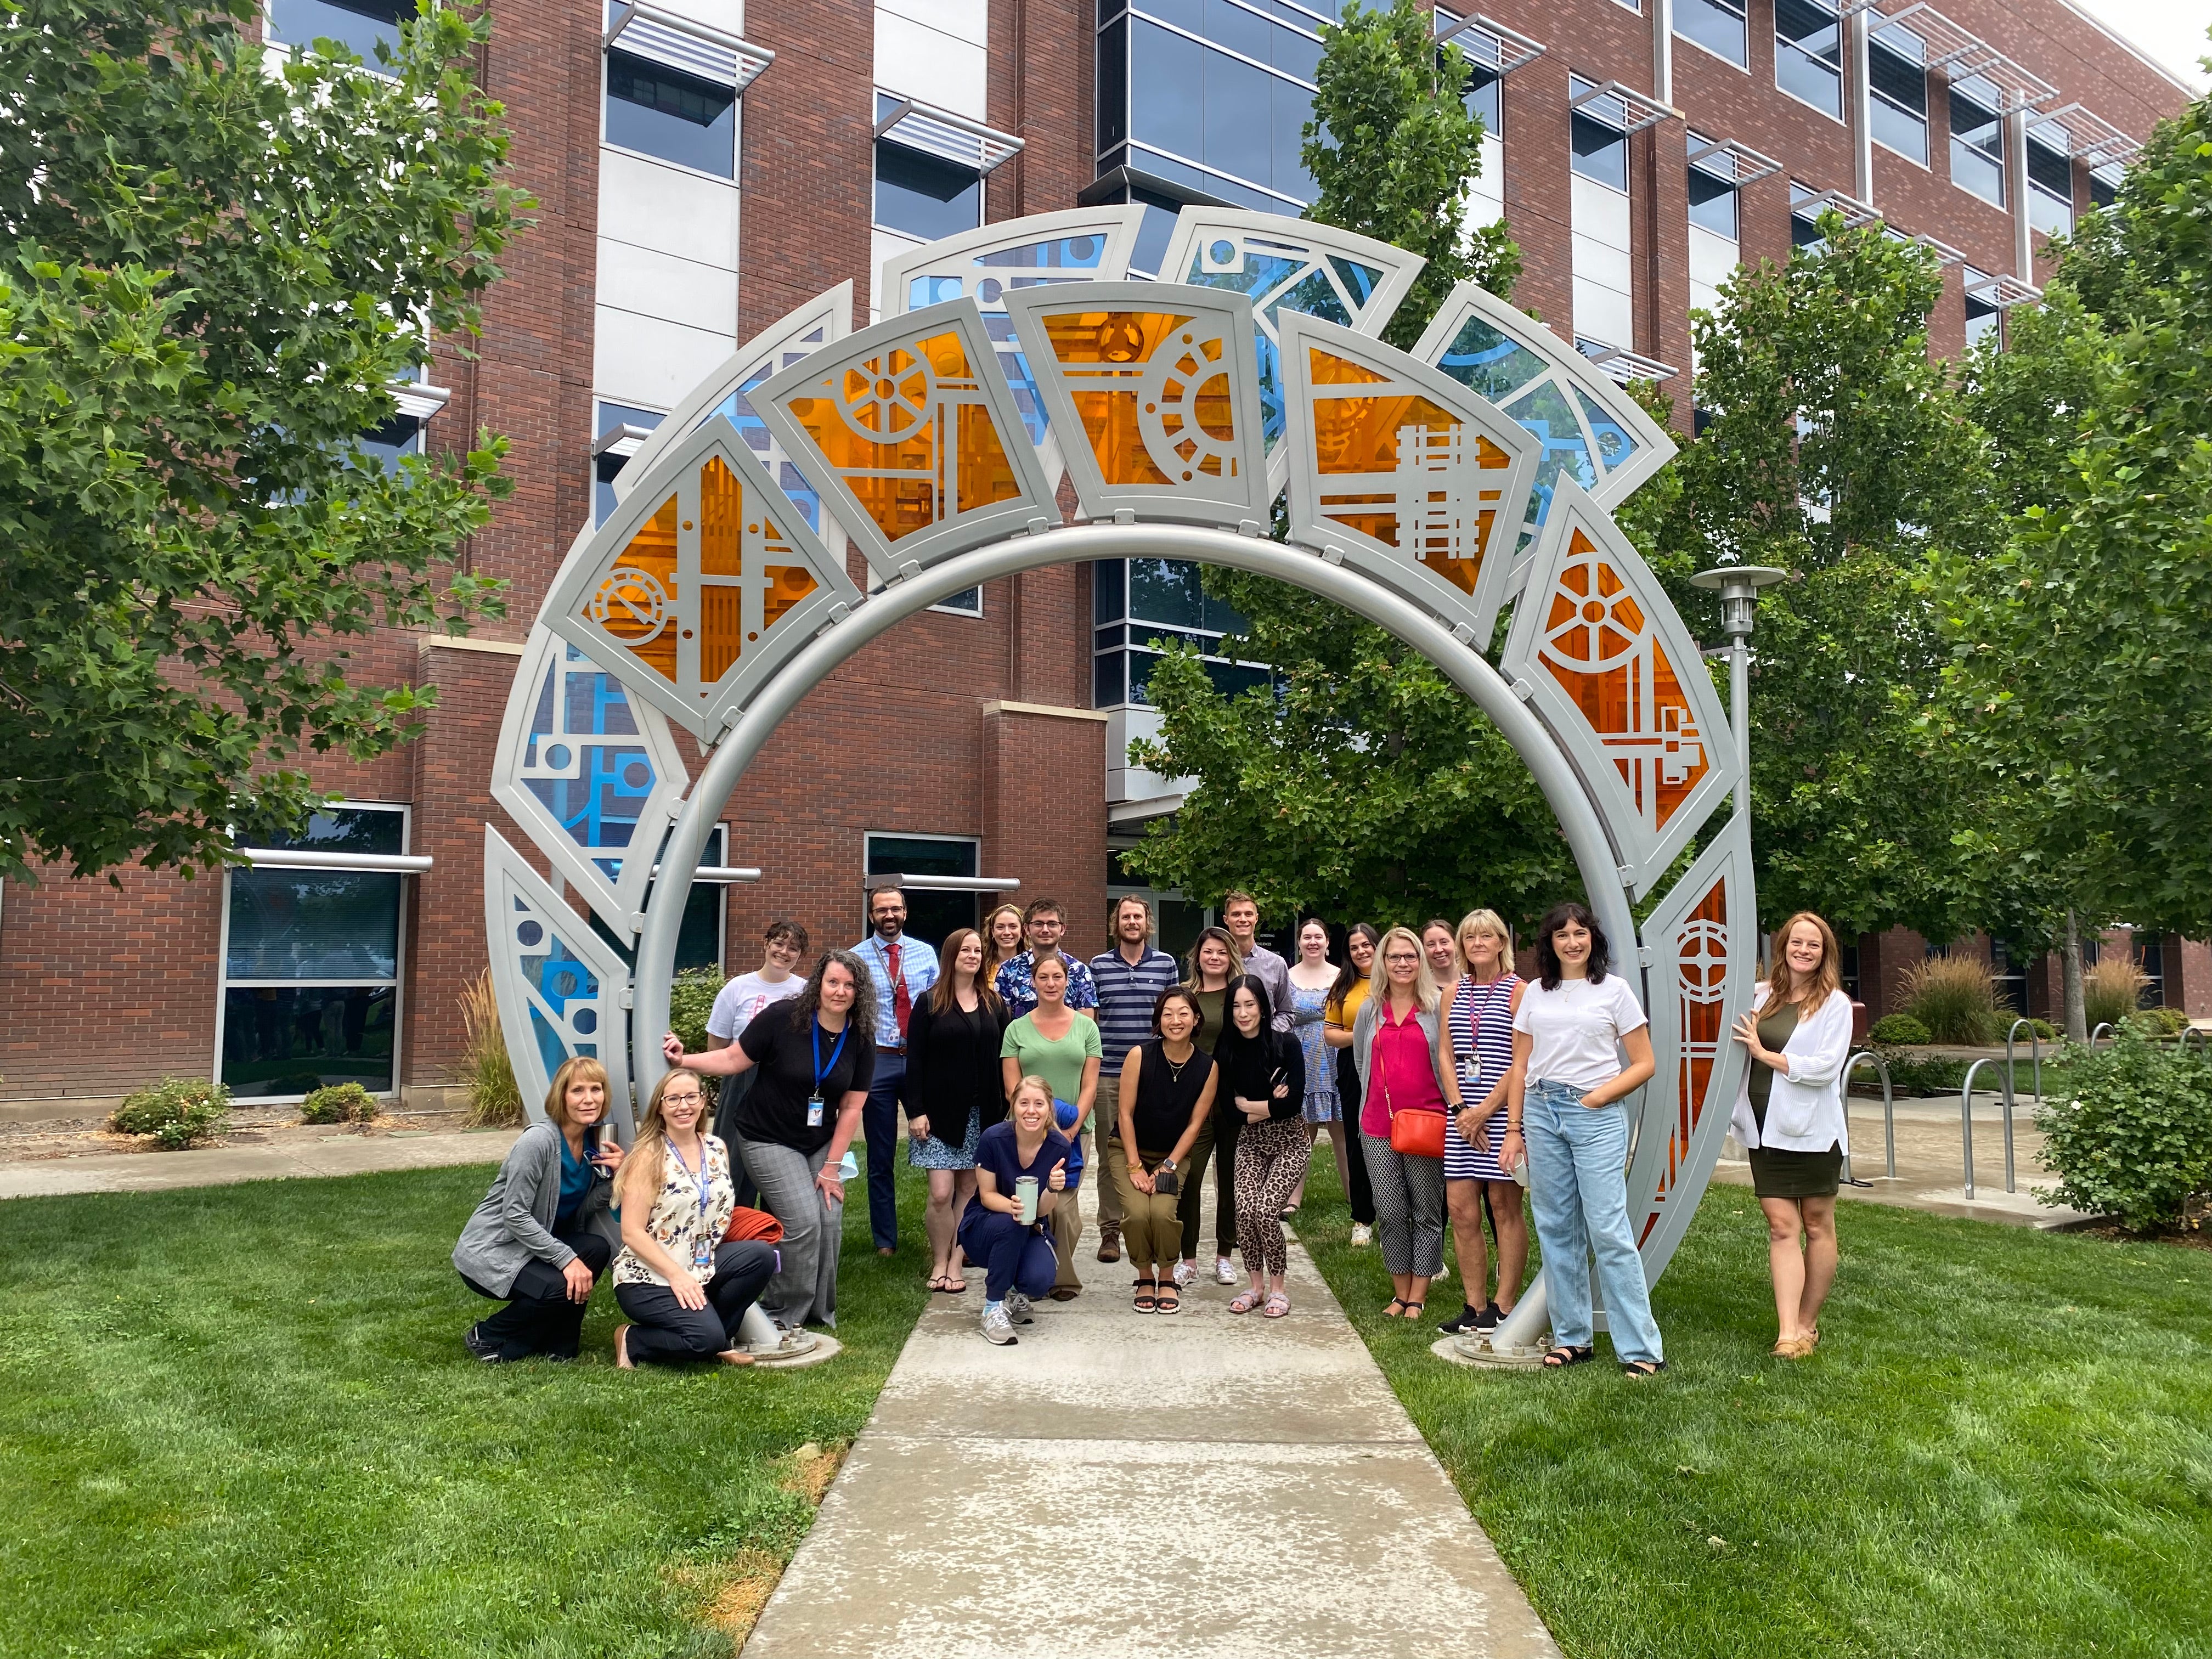 group Portrait by a monumental sculpture on Bois State campus